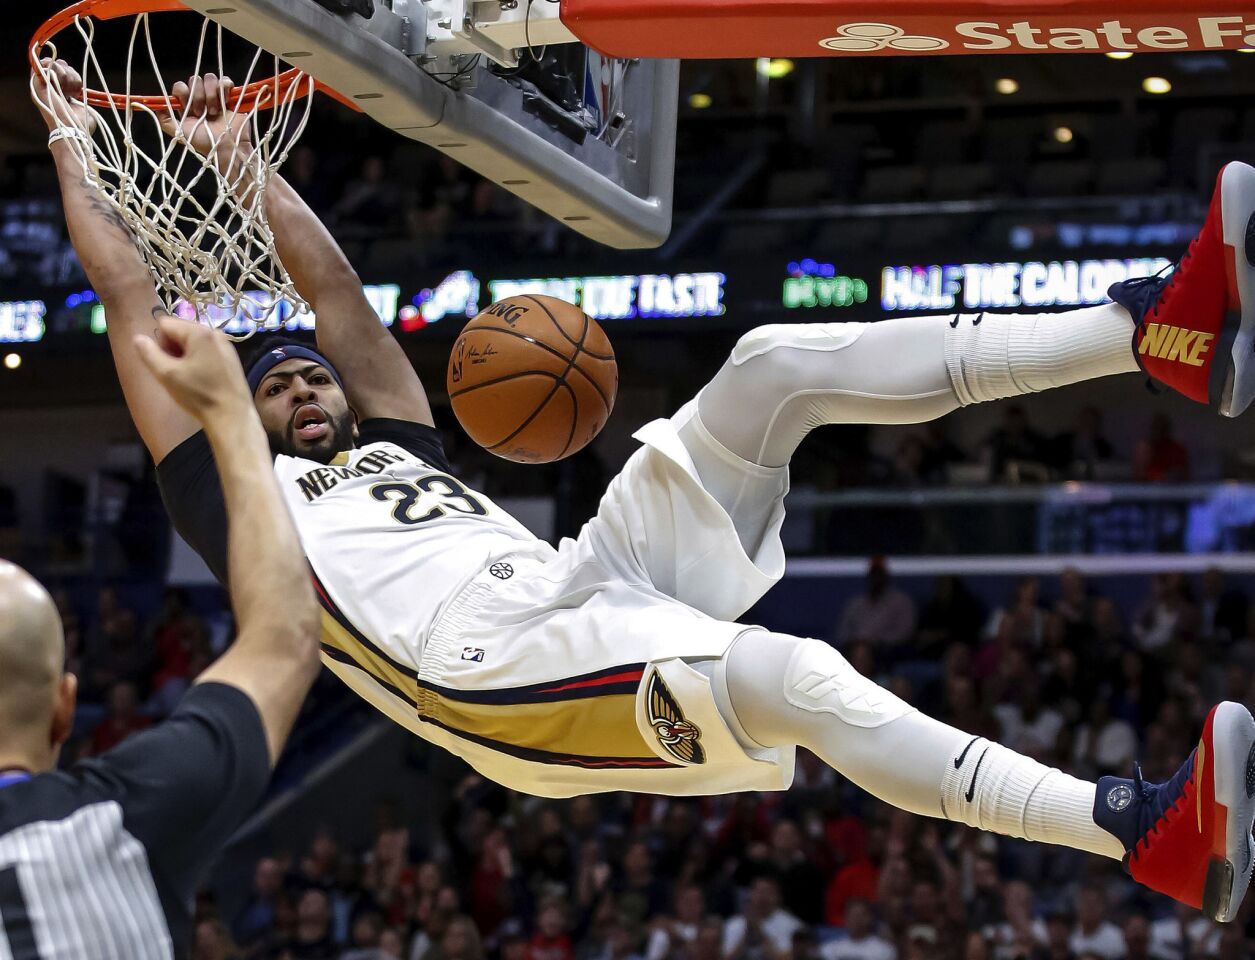 Pelicans forward Anthony Davis dunks against the Clippers during a game on Nov. 11, 2017.